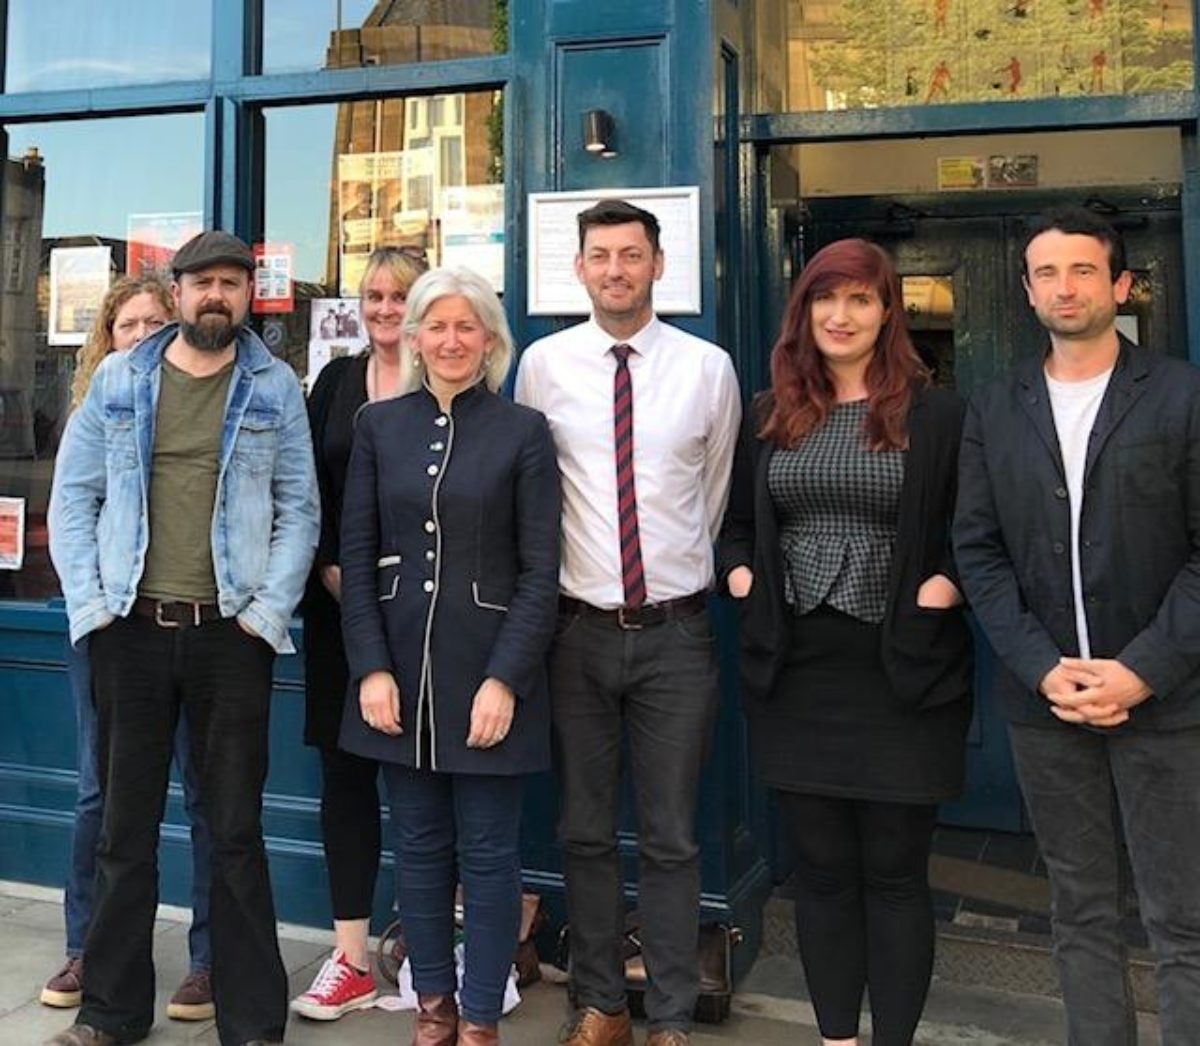 Marion Donaldson and Cammy Day, along with our Co-chair Frances Hoole  meet with some of the owners of Leith Depot and others in the campaign.